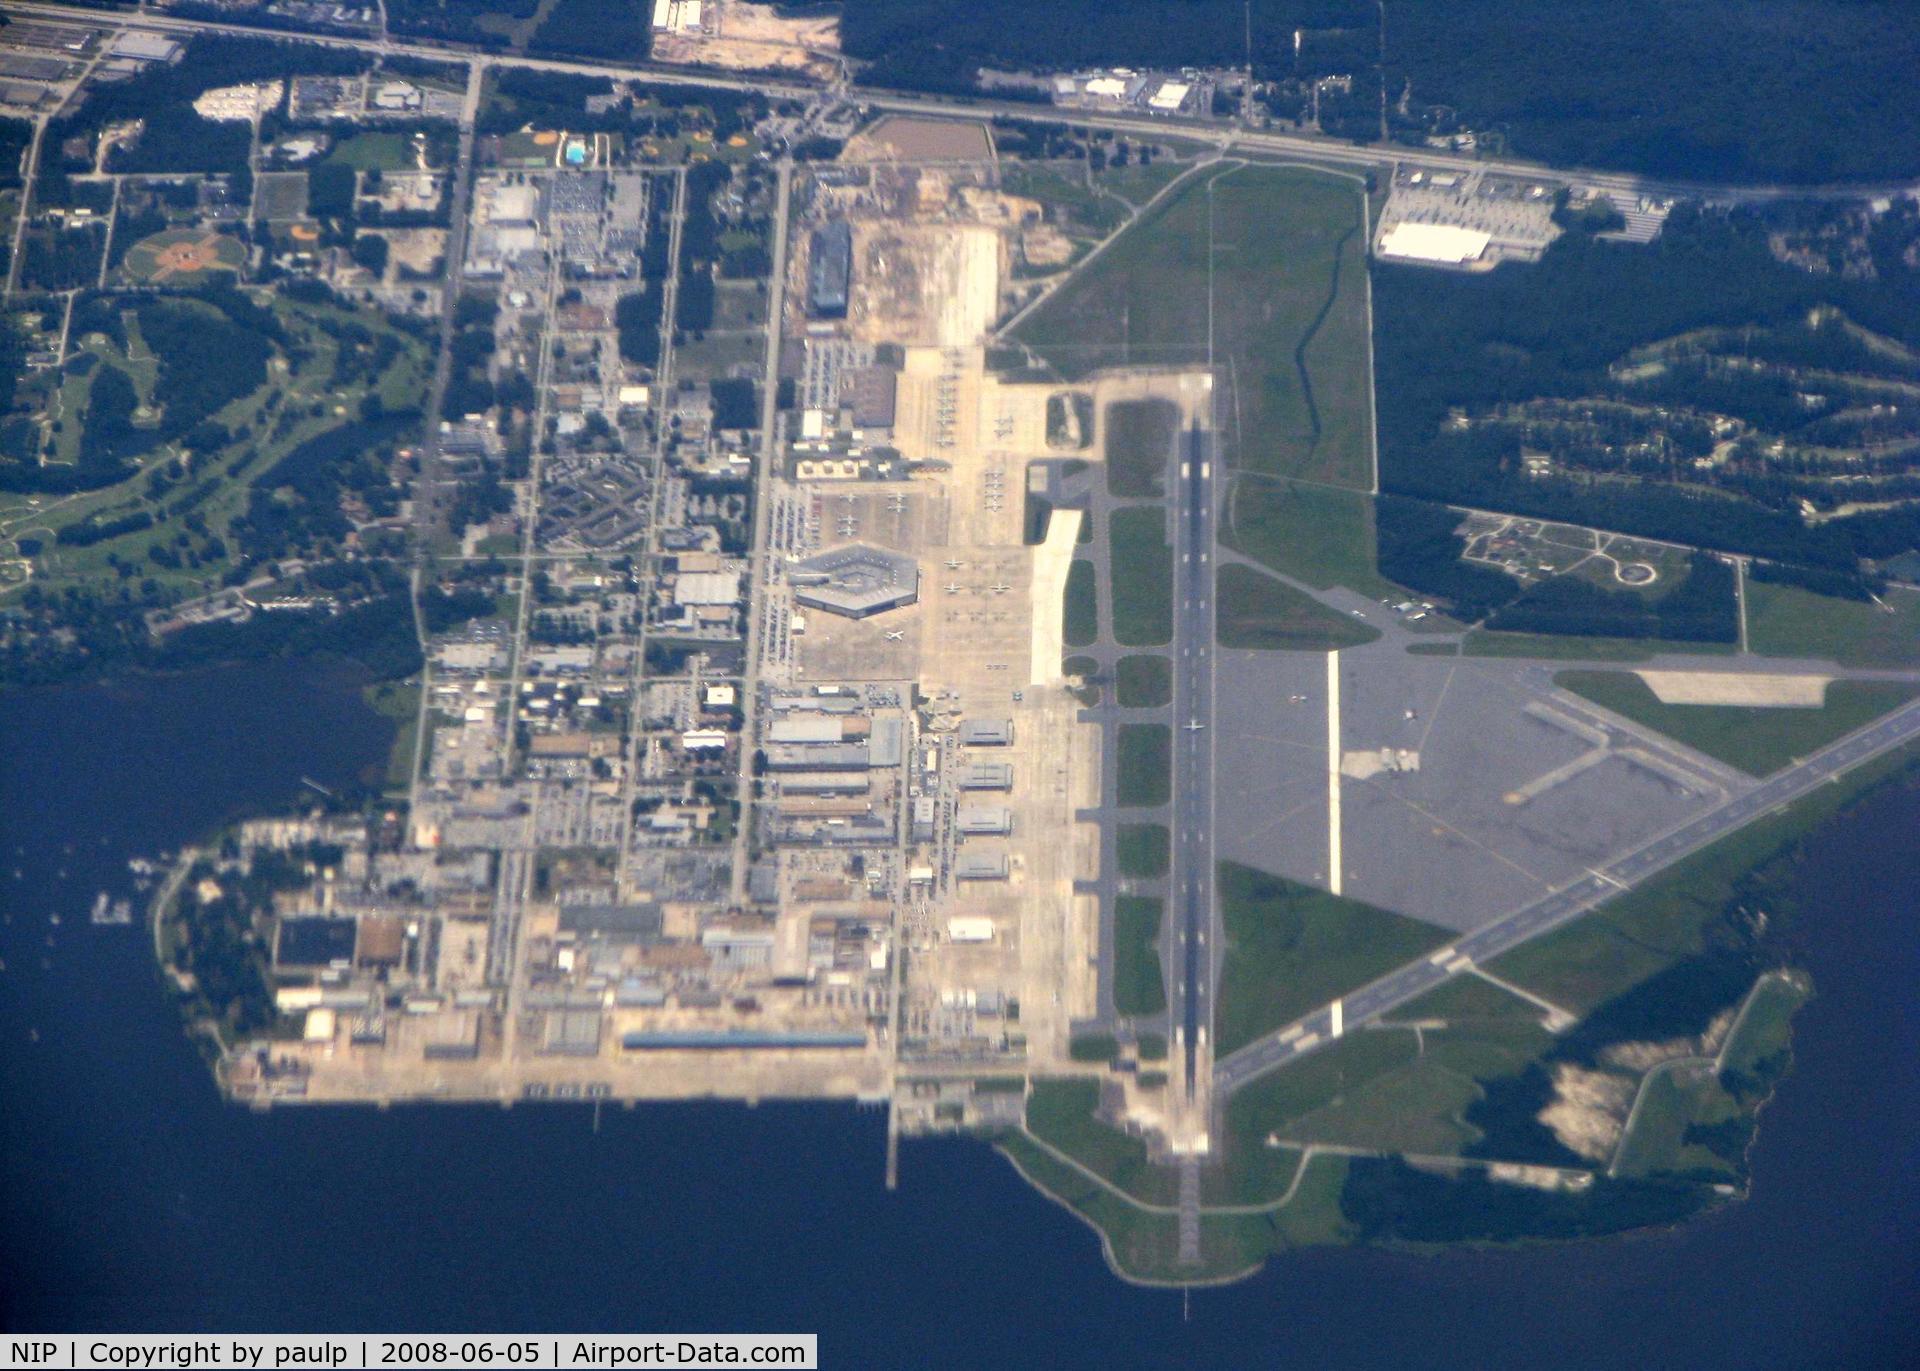 Jacksonville Nas (towers Fld) Airport (NIP) - Over Jacksonville NAS on the way to Shreveport Regional from Orlando Sanford.